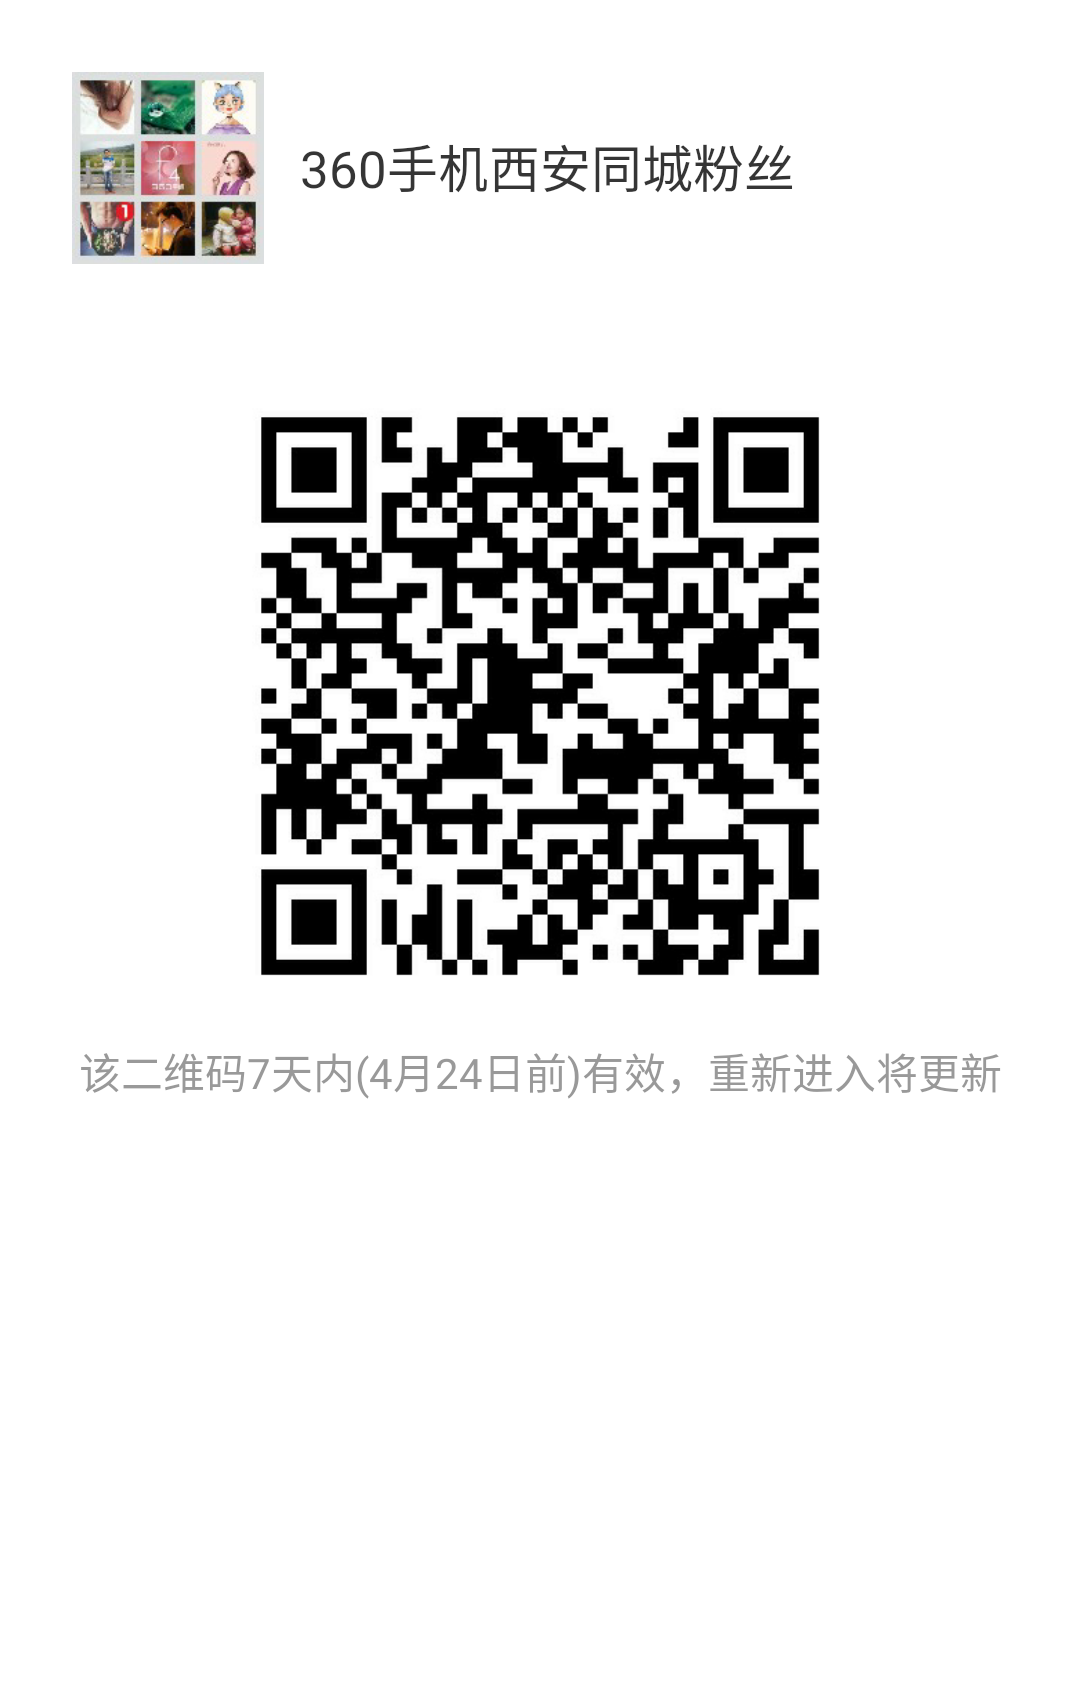 mmqrcode1460895944671.png